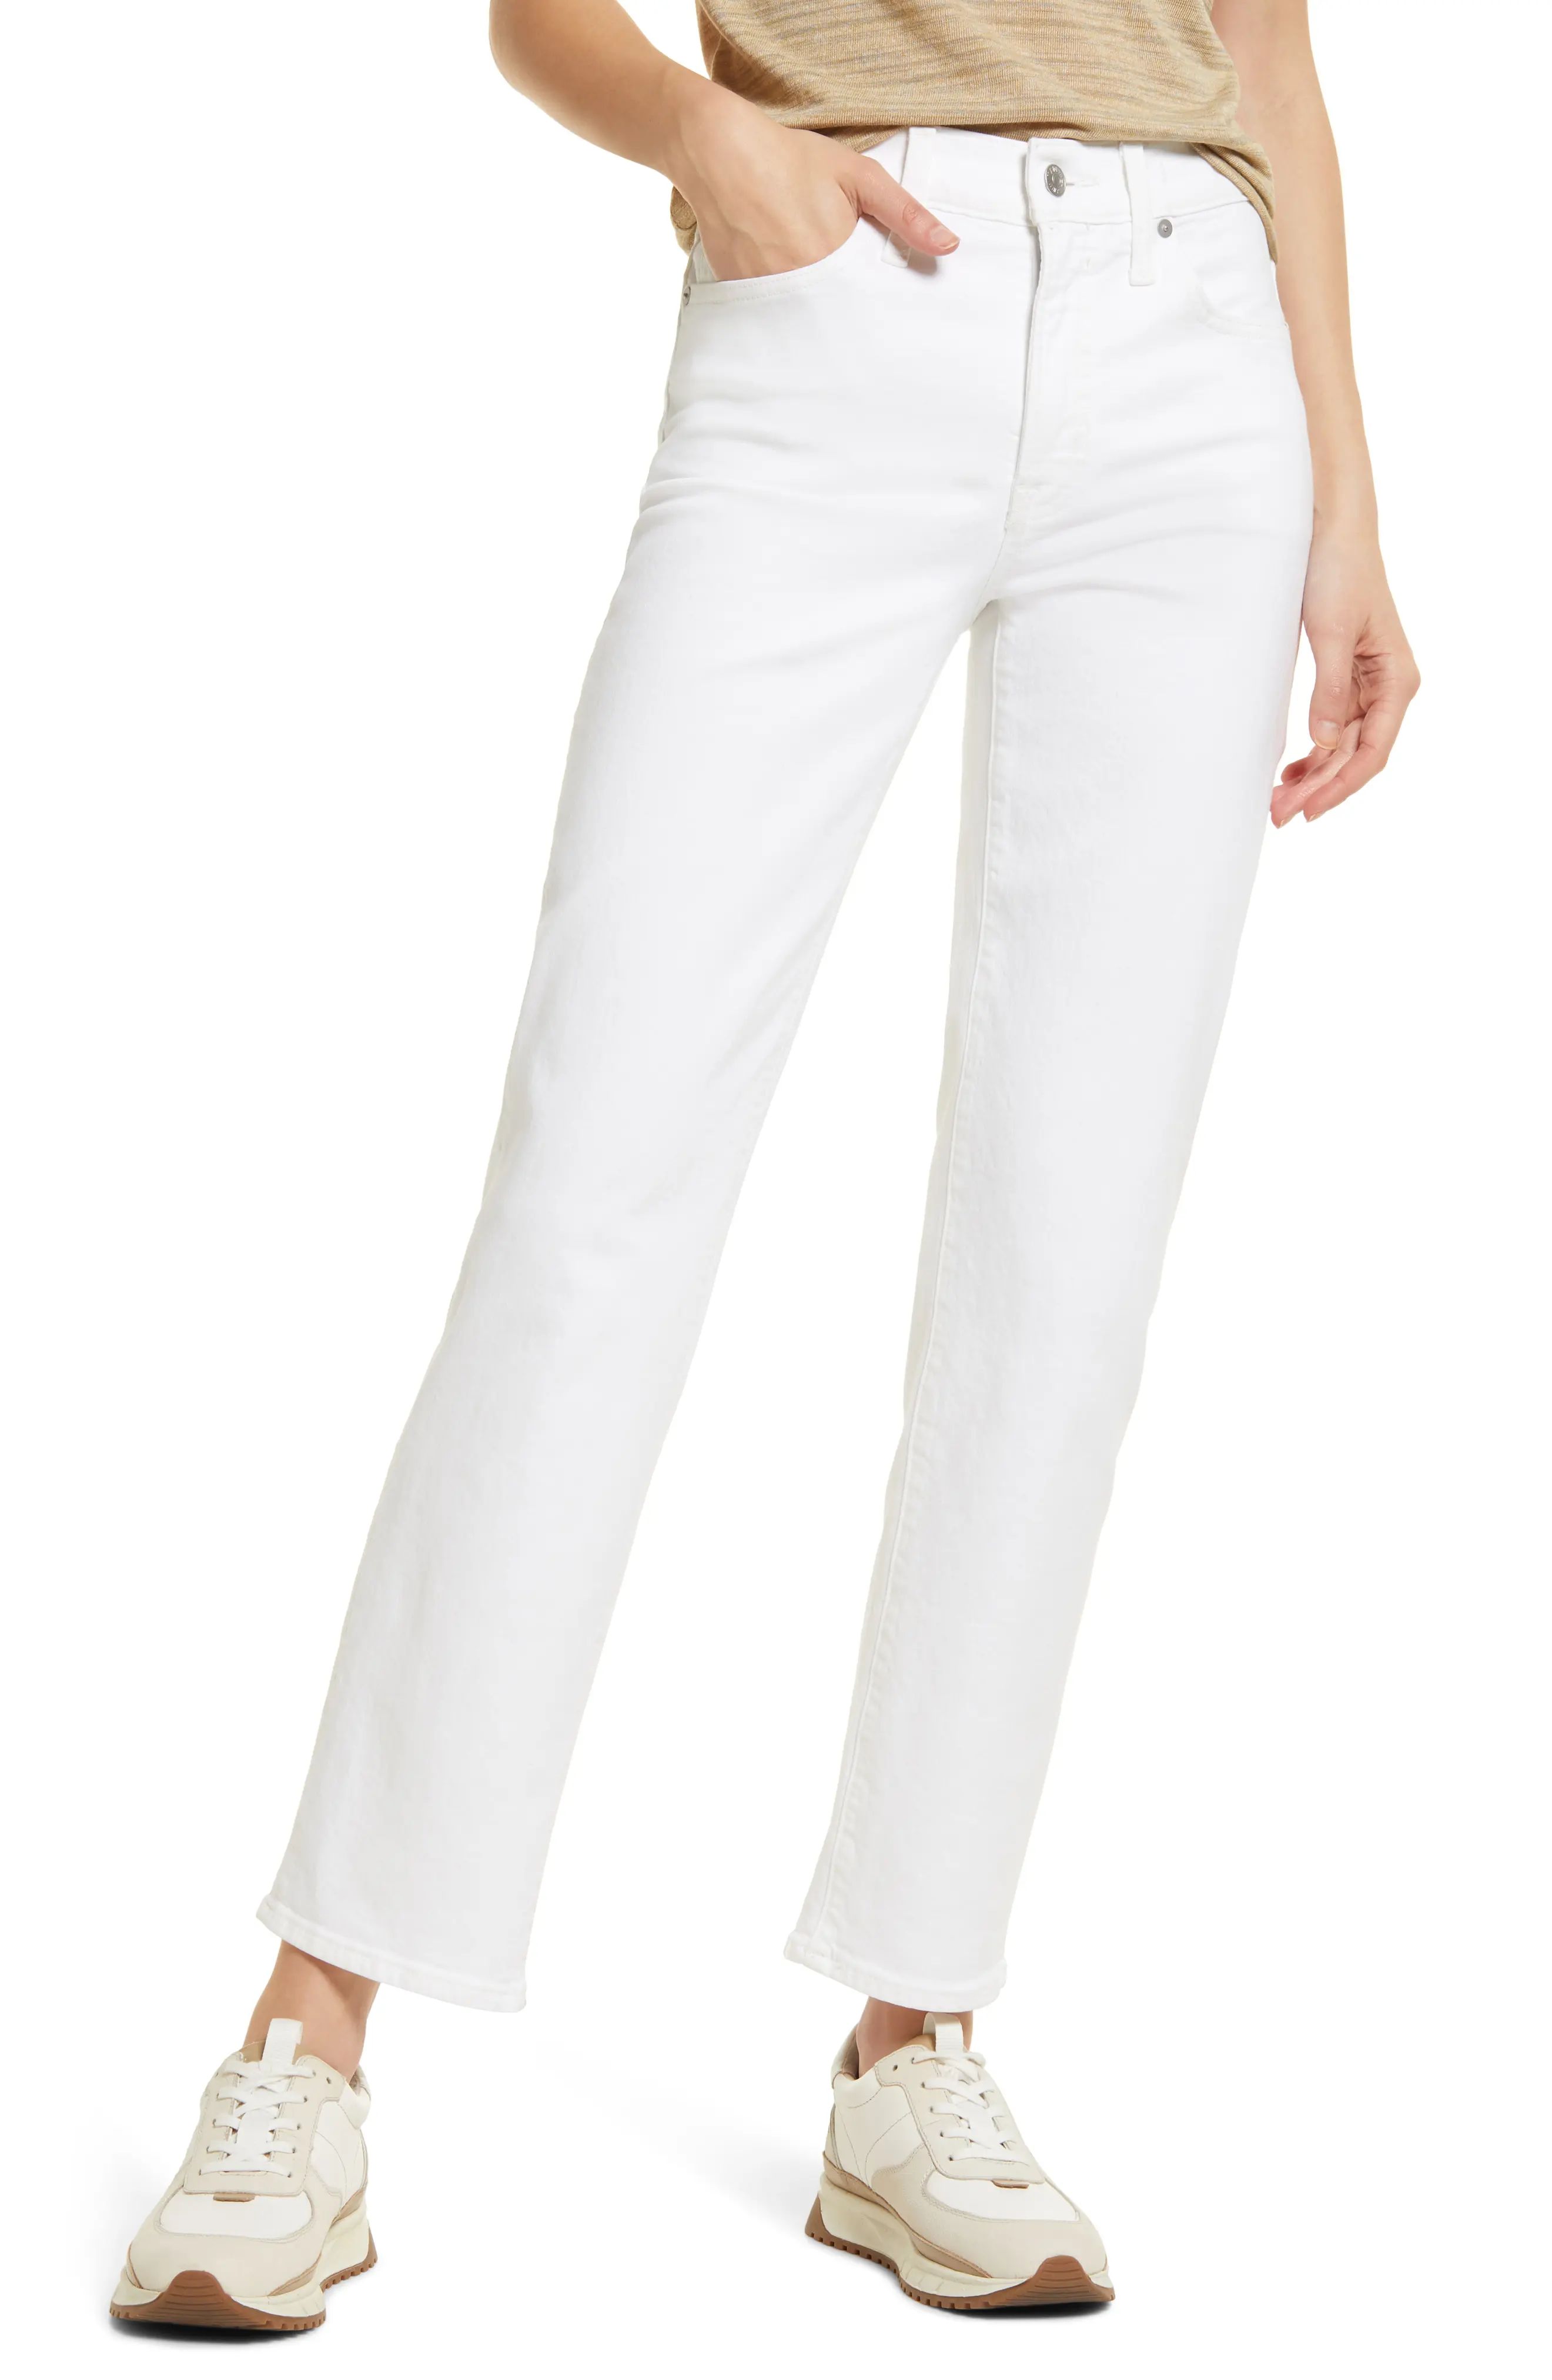 Madewell Women's The Mid Rise Perfect Raw Hem Straight Leg Jeans in Tile White at Nordstrom, Size 26 | Nordstrom